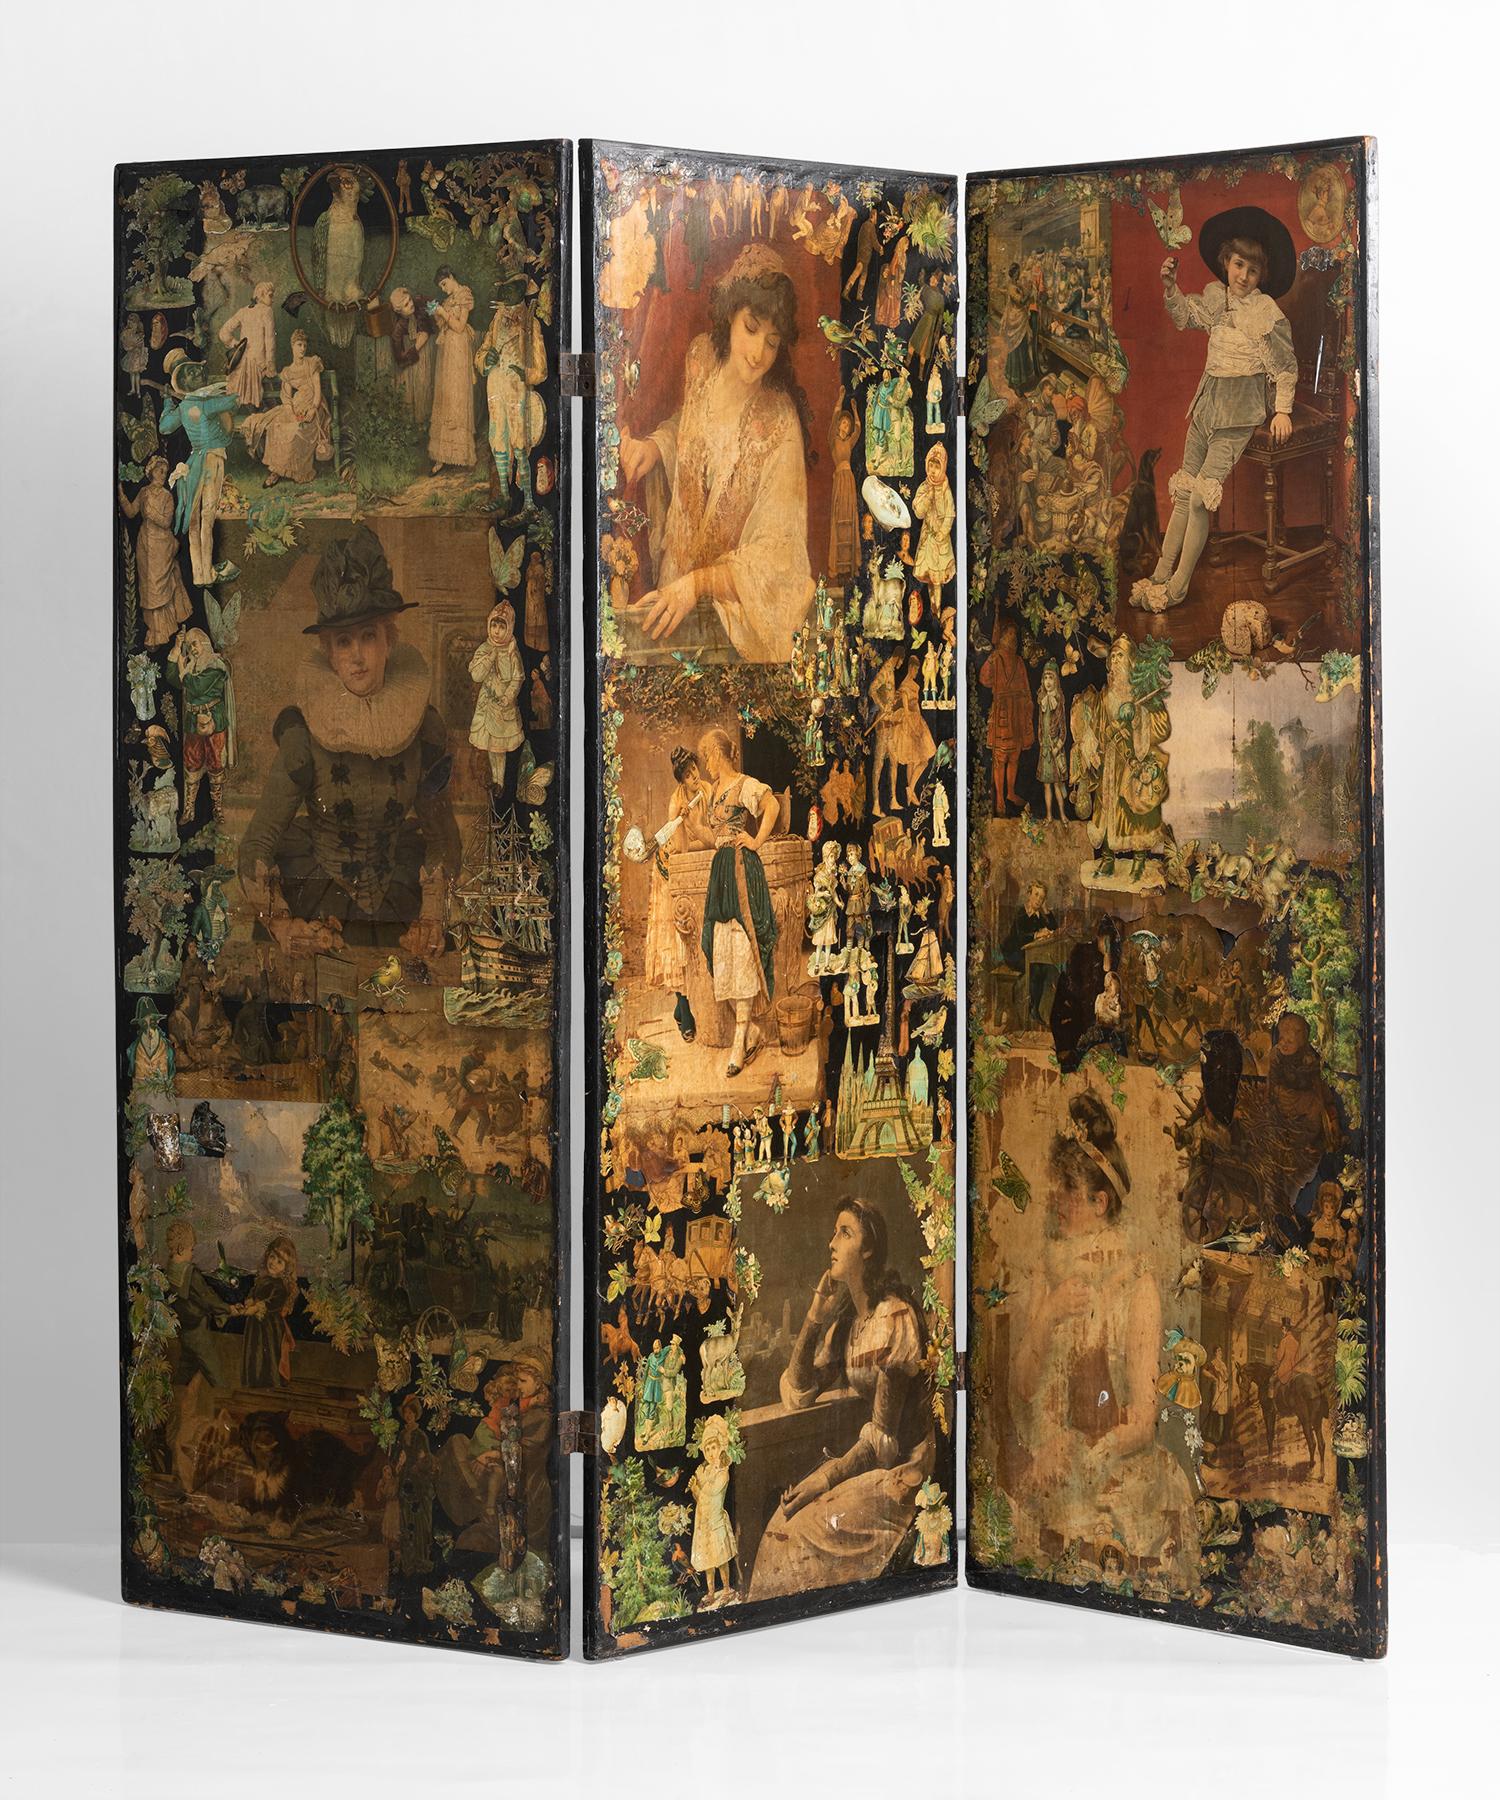 3-panel Folk Art screen Europe, early 20th century.

One of a kind screen with decoupage on all sides.